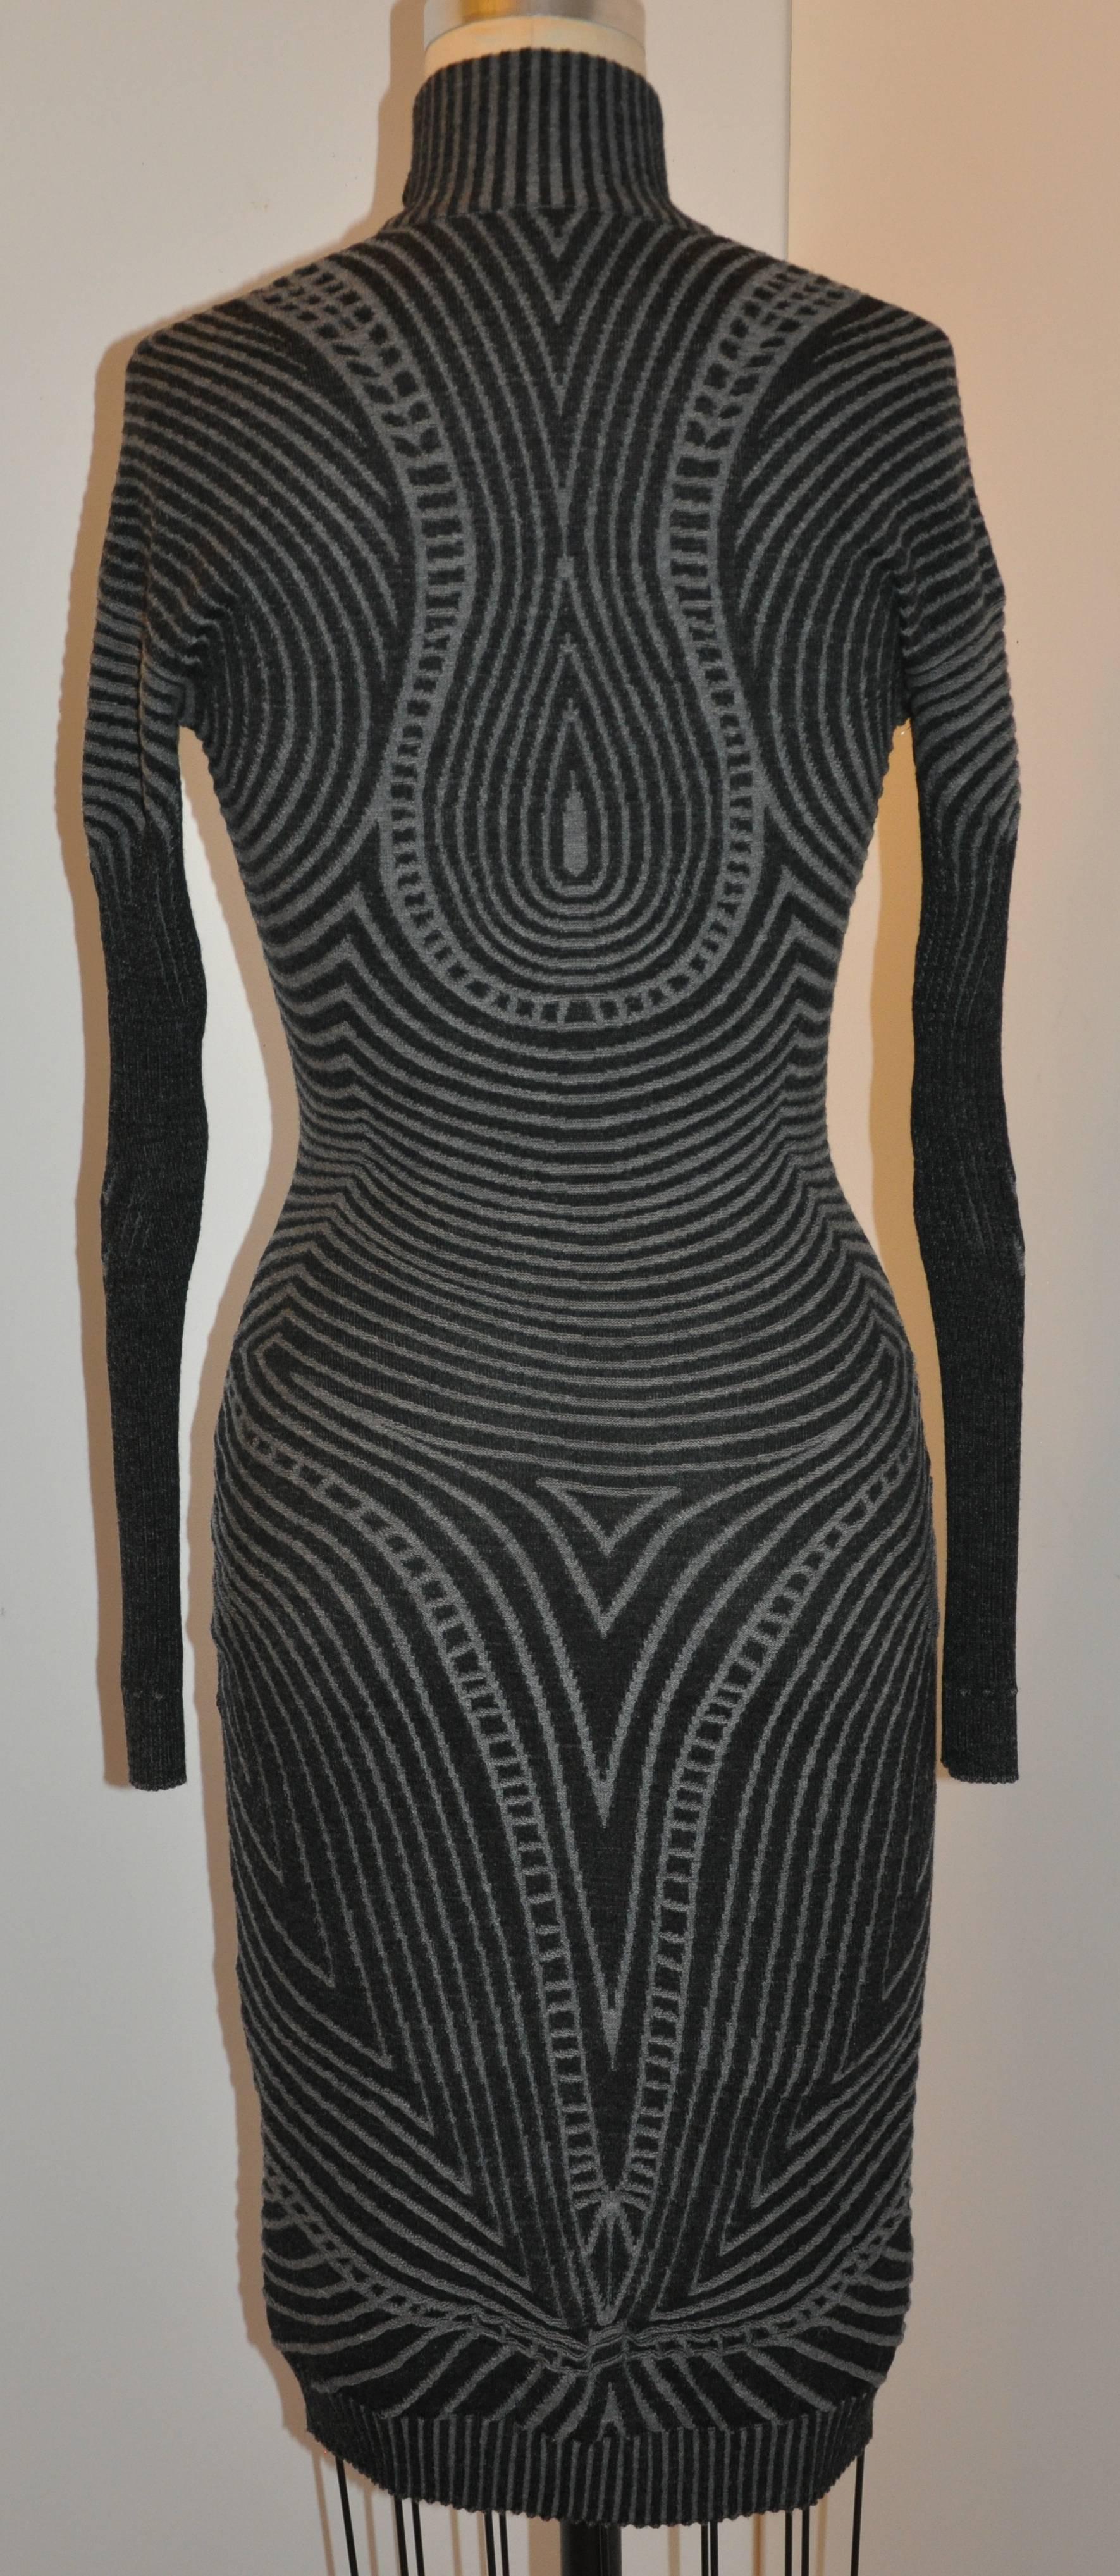       Alexander McQueen's wonderful elegant yet sexy charcoal and gray body-hugging bold abstract high-neck deep zipper front can be worn from day into the evening hours. During the day, wear this merino-wool dress zippered, and as the evening comes